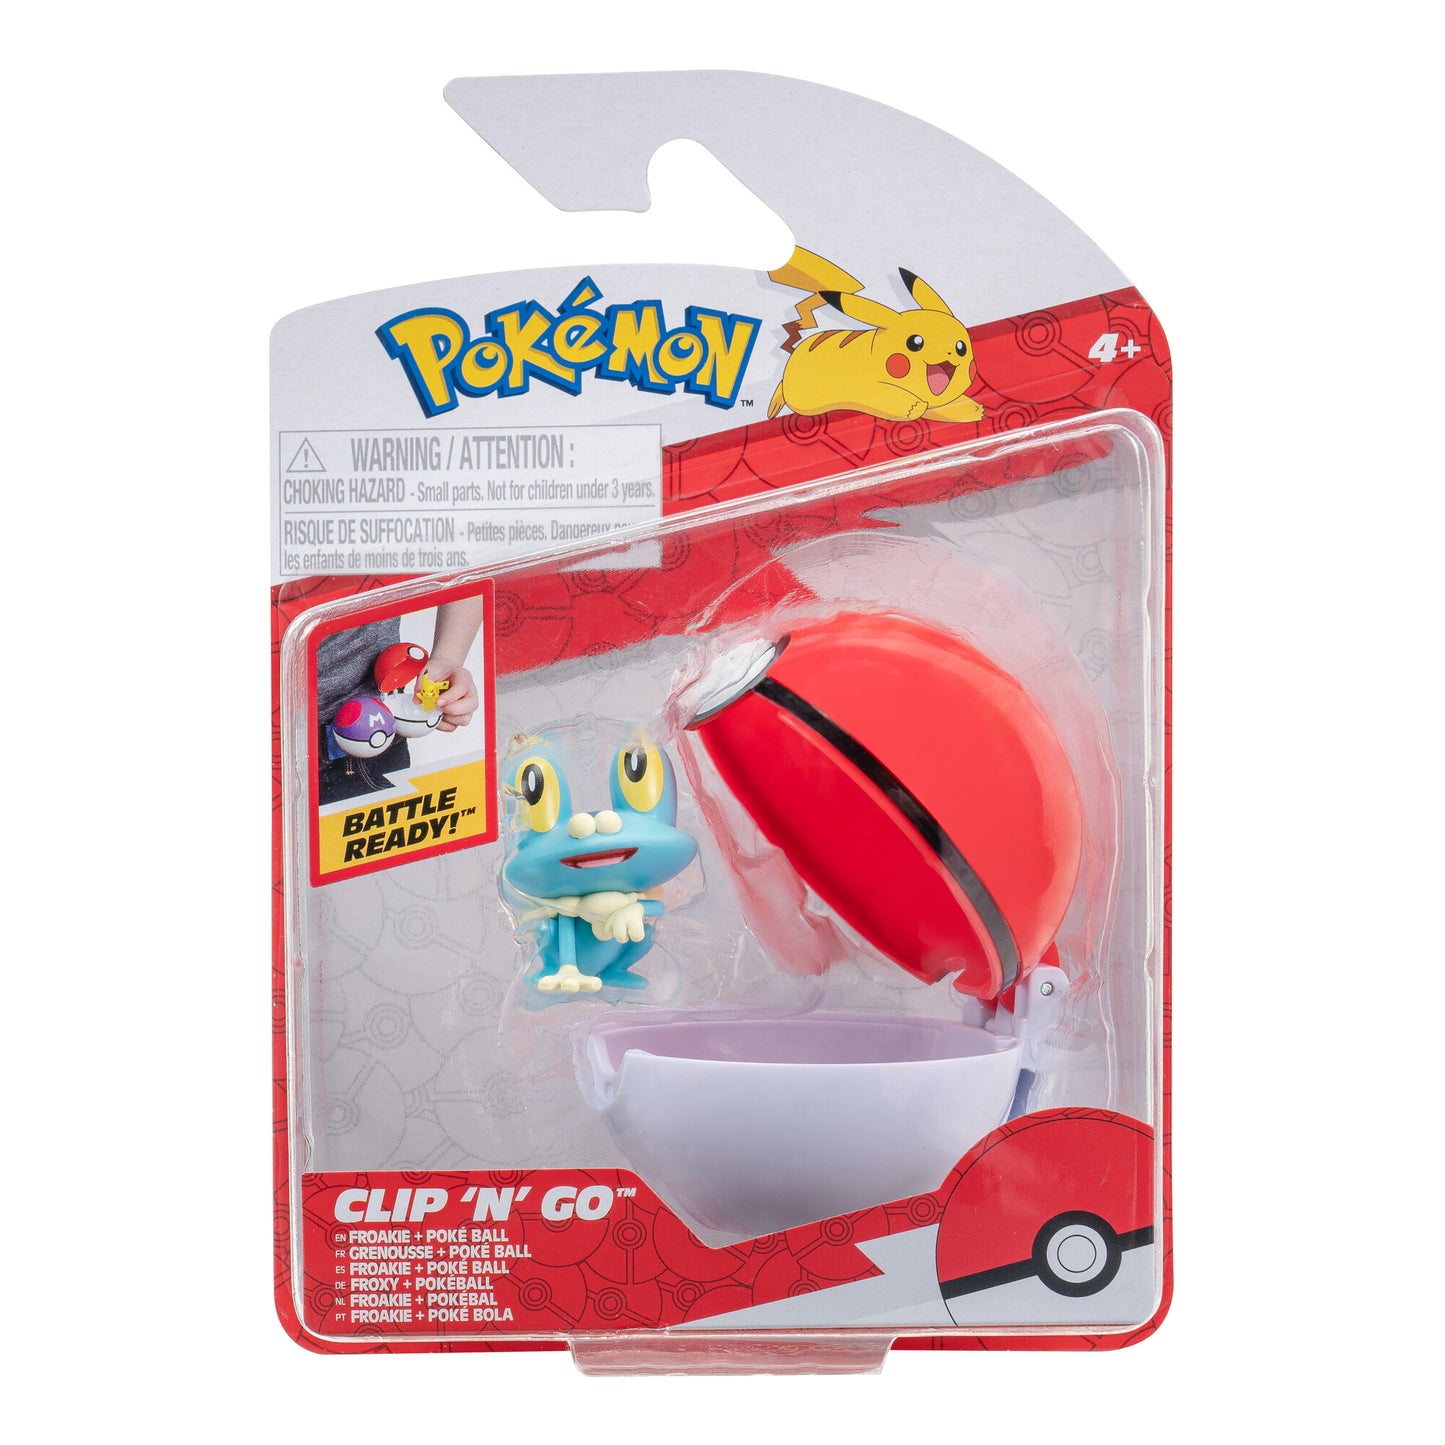 Pokemon Clip ‘N’ Go Froakie and Poke Ball - Includes 2-Inch Battle Figure and Poke Ball Accessory